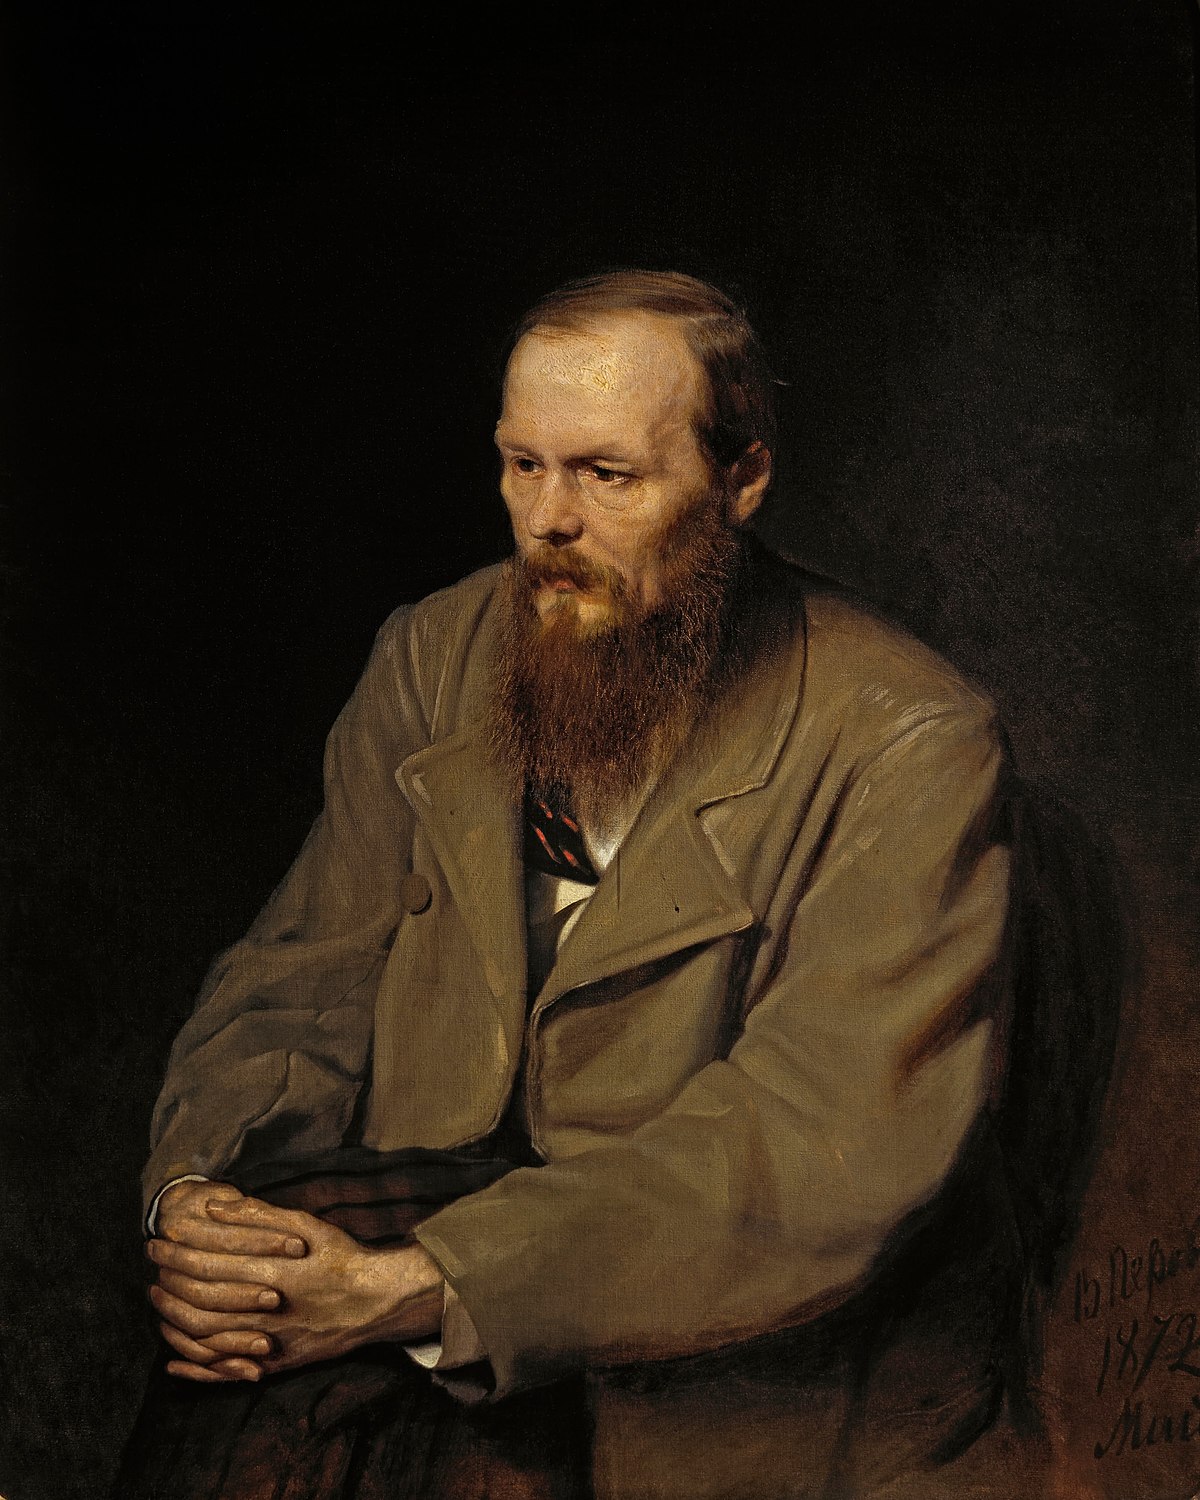 1849- Fyodor Dostoyevsky is spared from the firing squad at the last minute